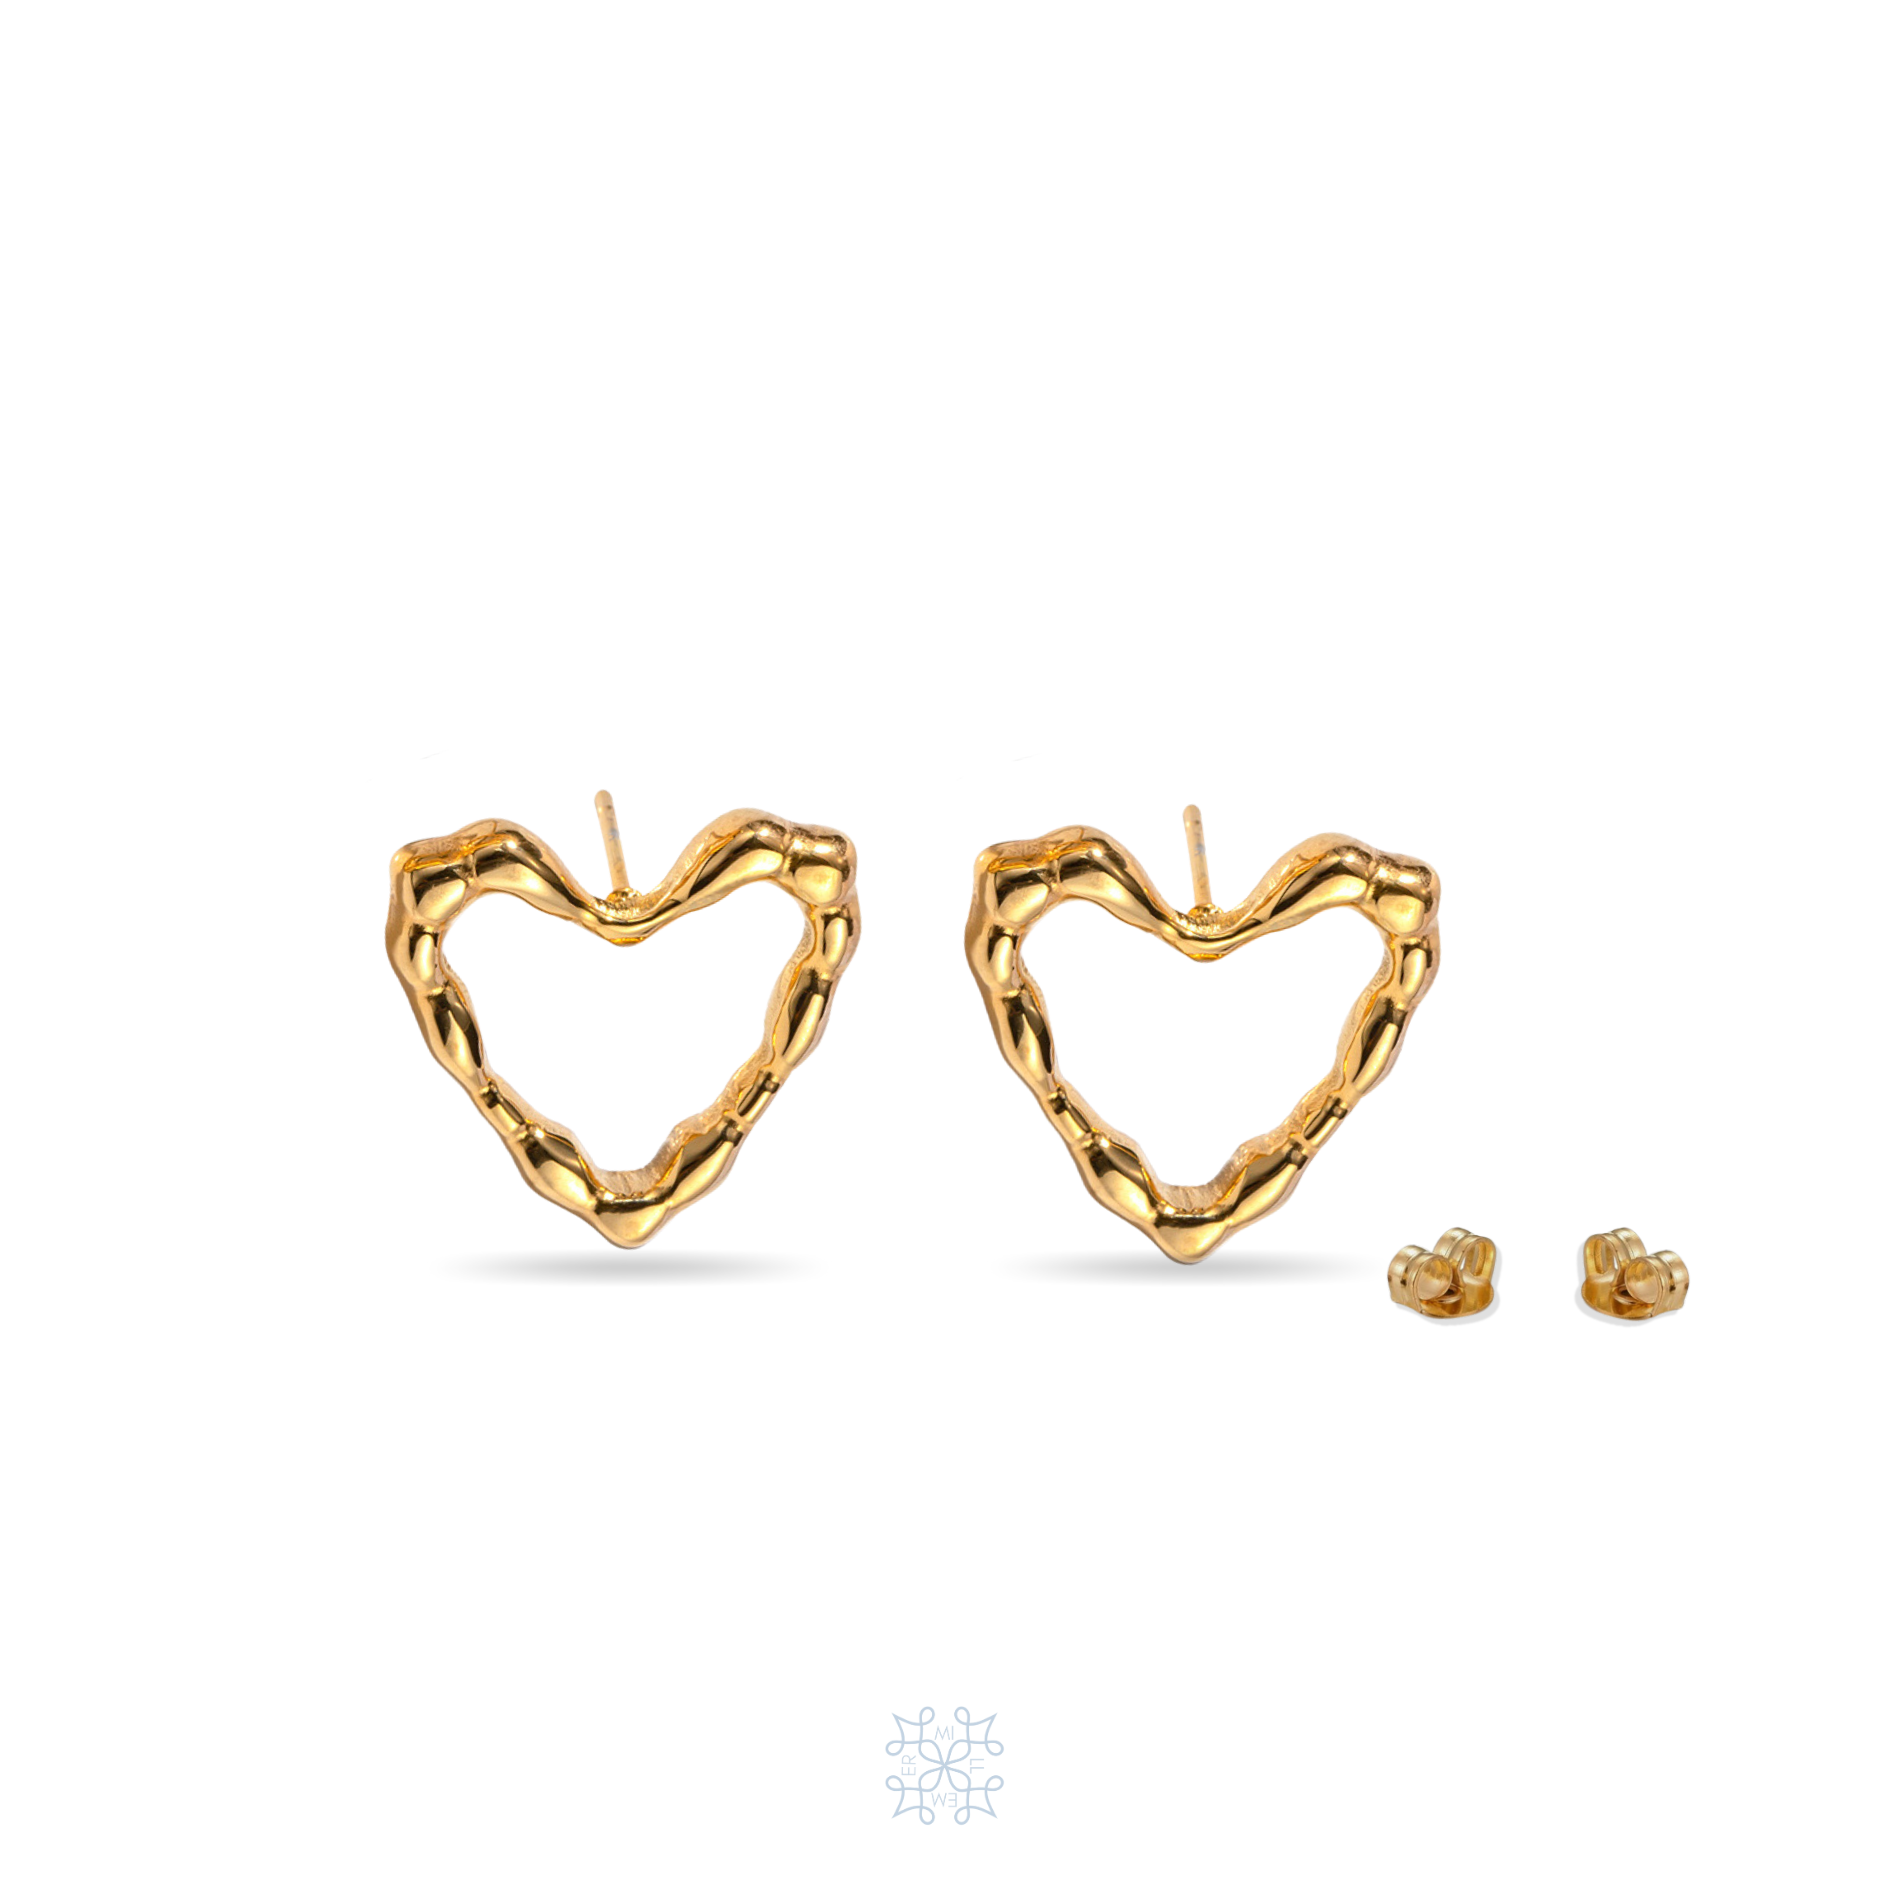 Heart shape gold stud earrings. Irregular surface on the border of the heart shape. the base of the earrings is empty the heart shape is the borders of the design.